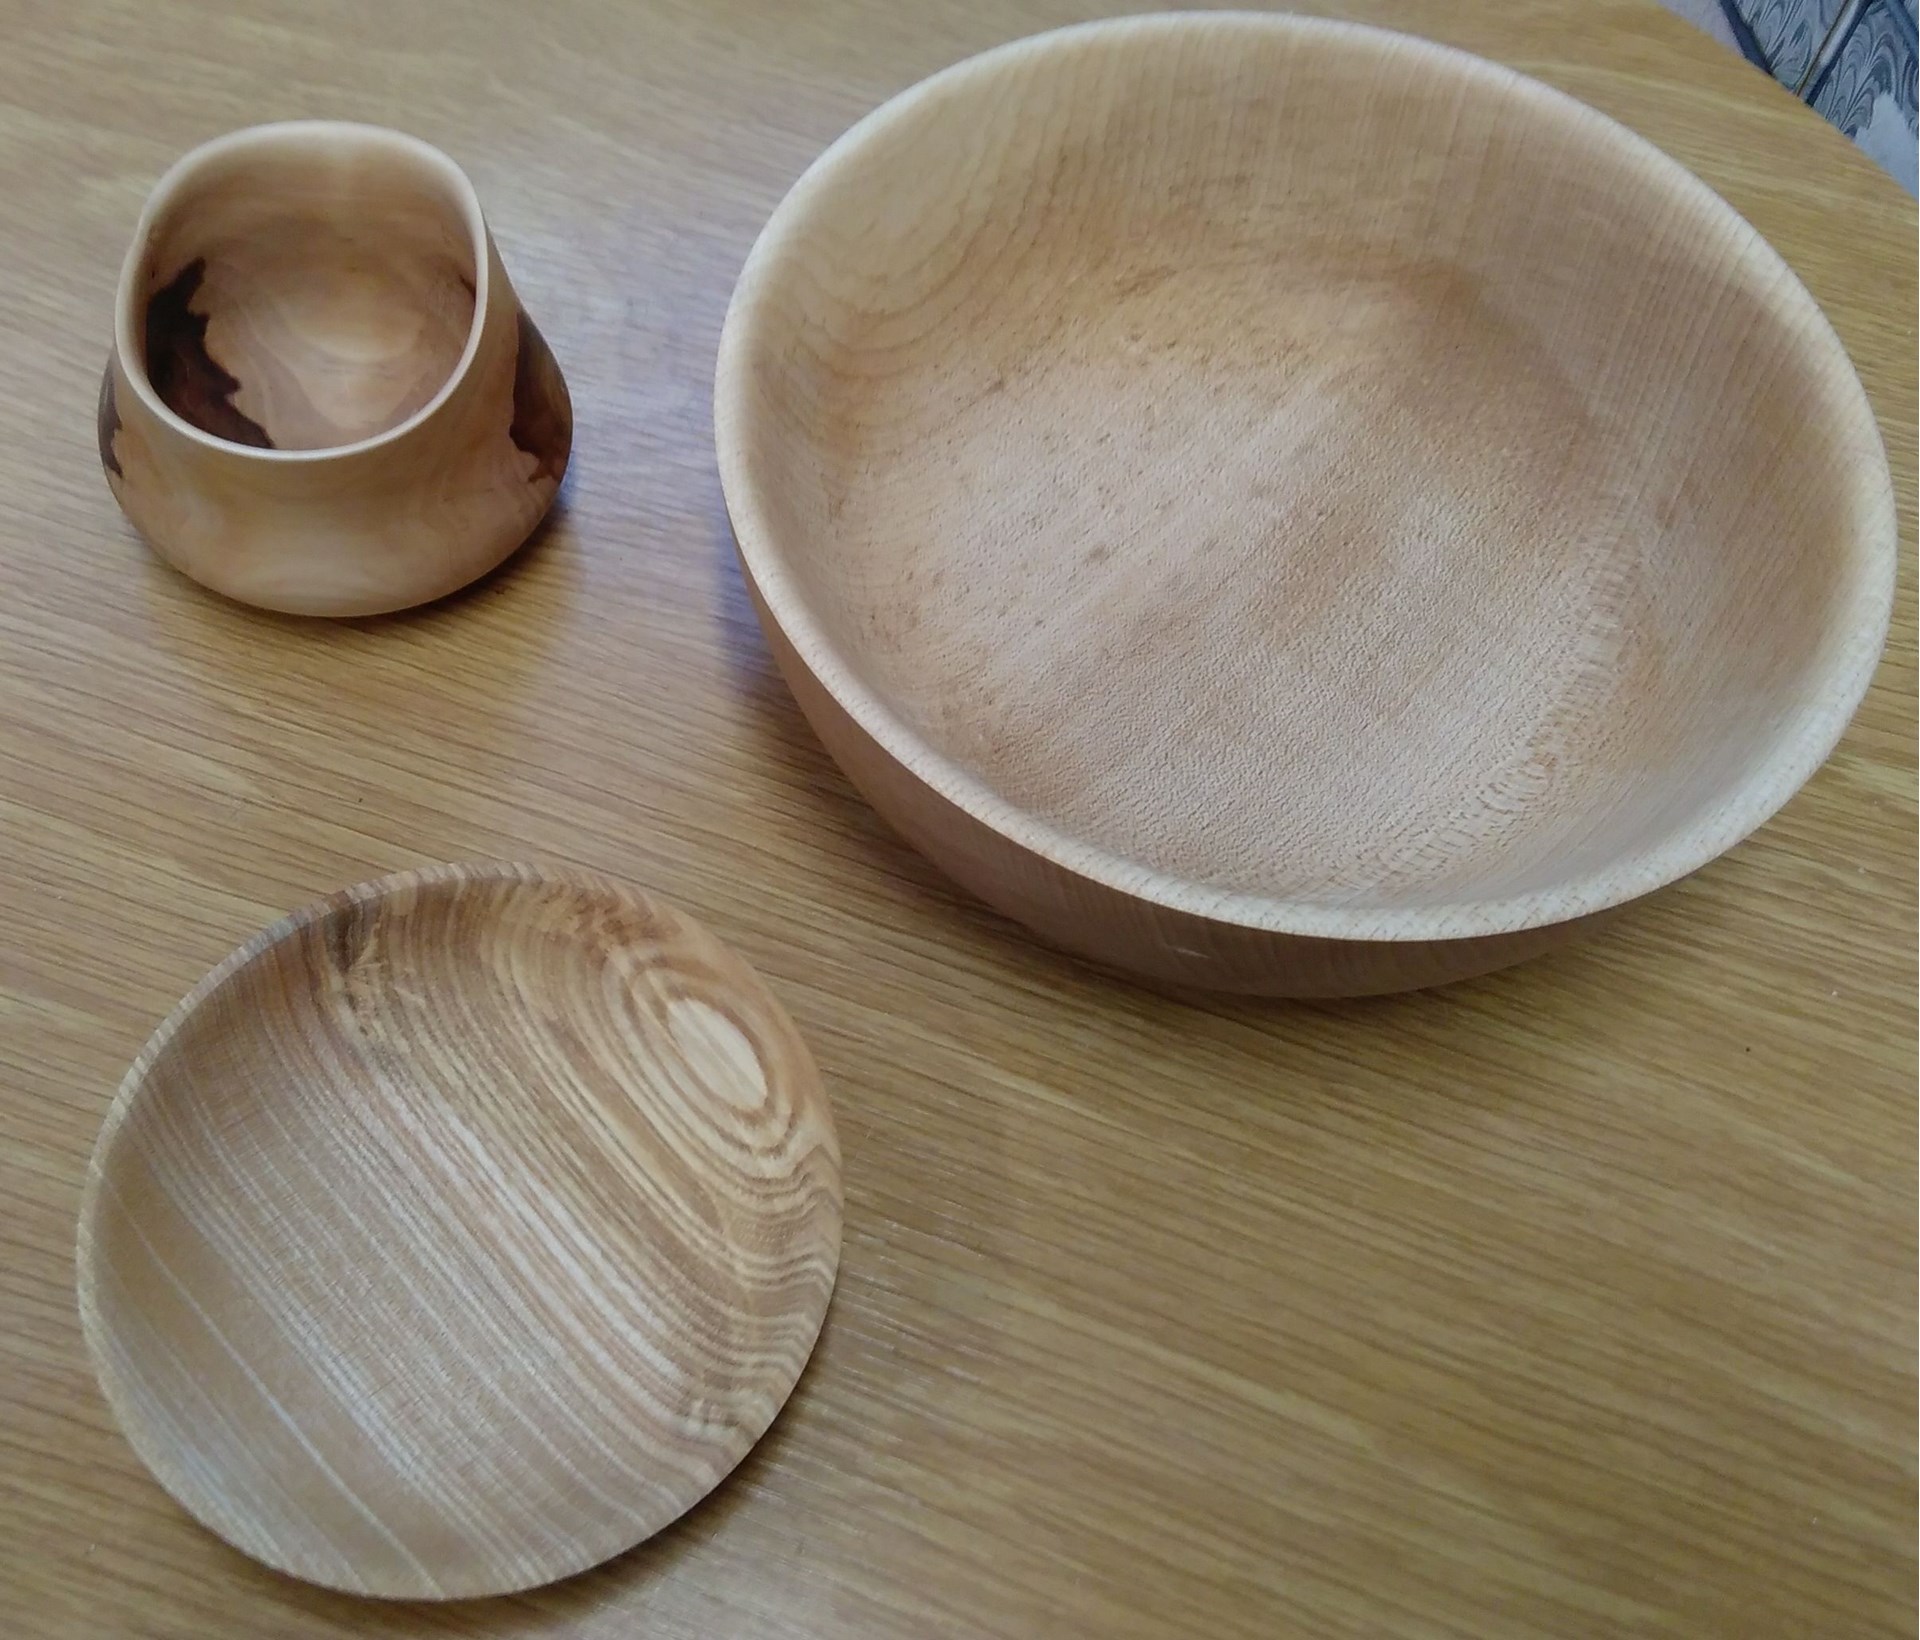 Members are building up experience in turning. The bowl and plate was made by Mike on a course run by Neil (workerinwood.co.uk). The distorted bowl wis made of green applewood and has taken up the shape as it dries out. Made by Neil.